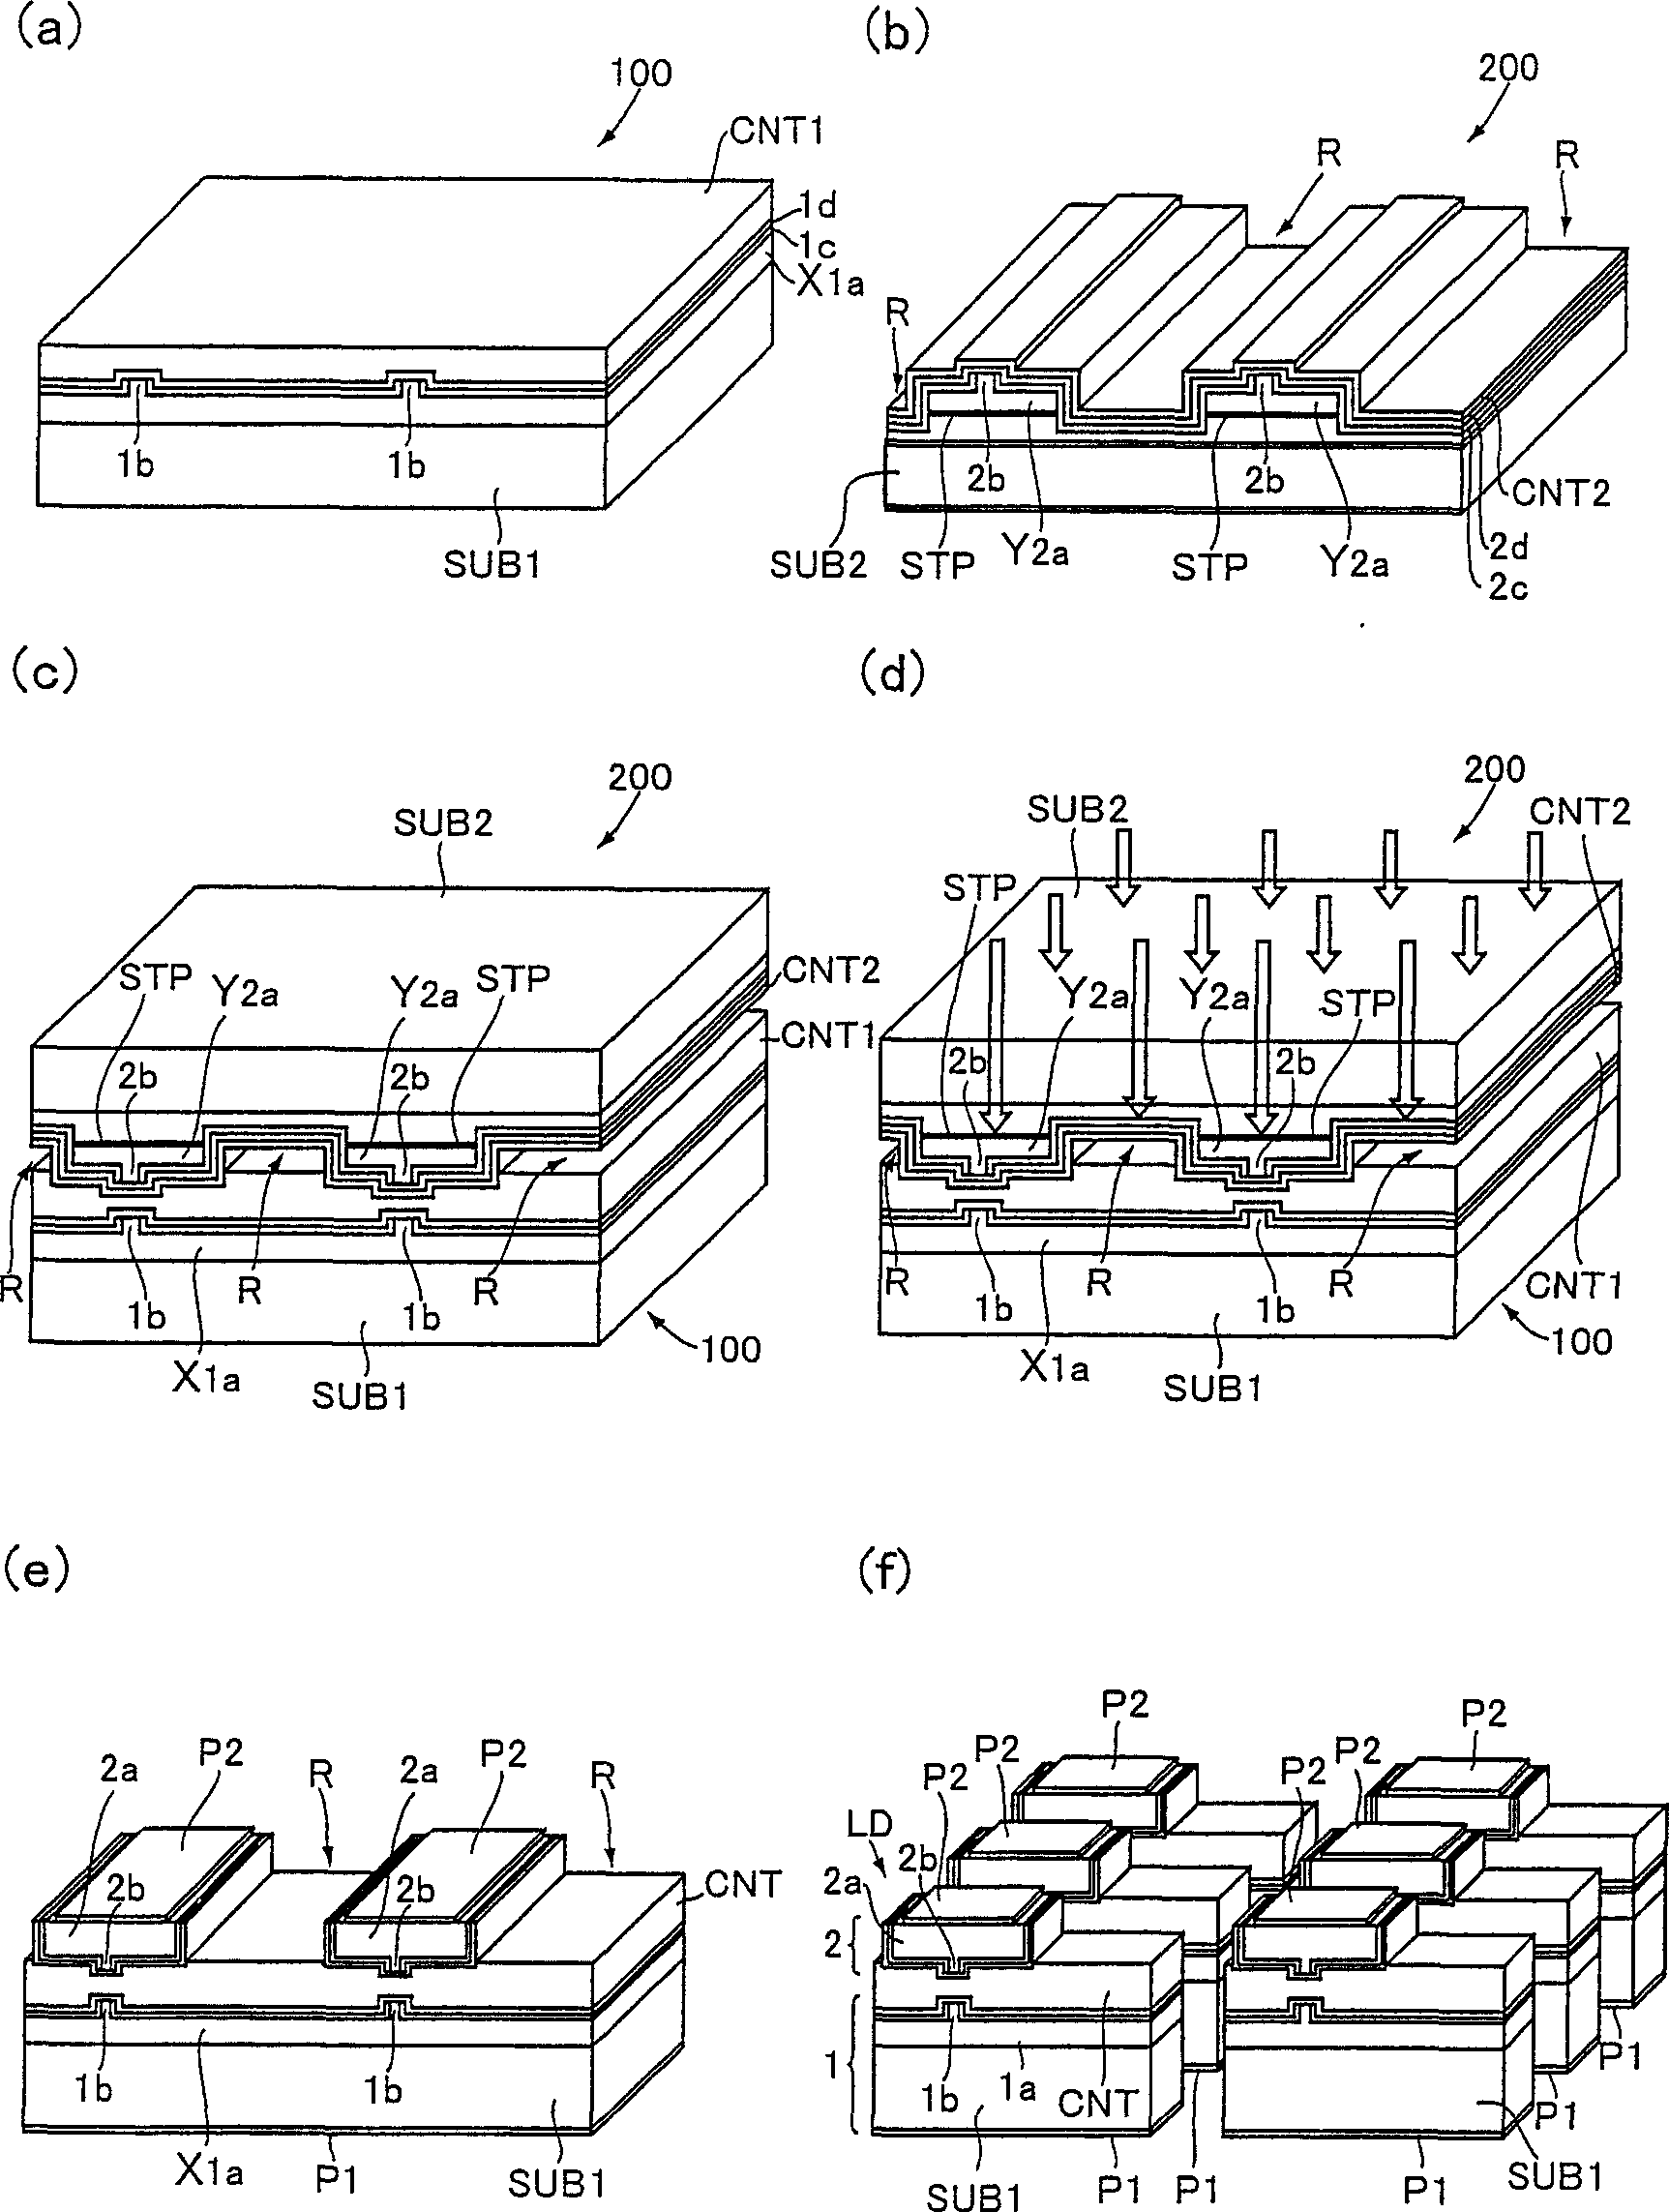 Process for fabricating semiconductor laser device